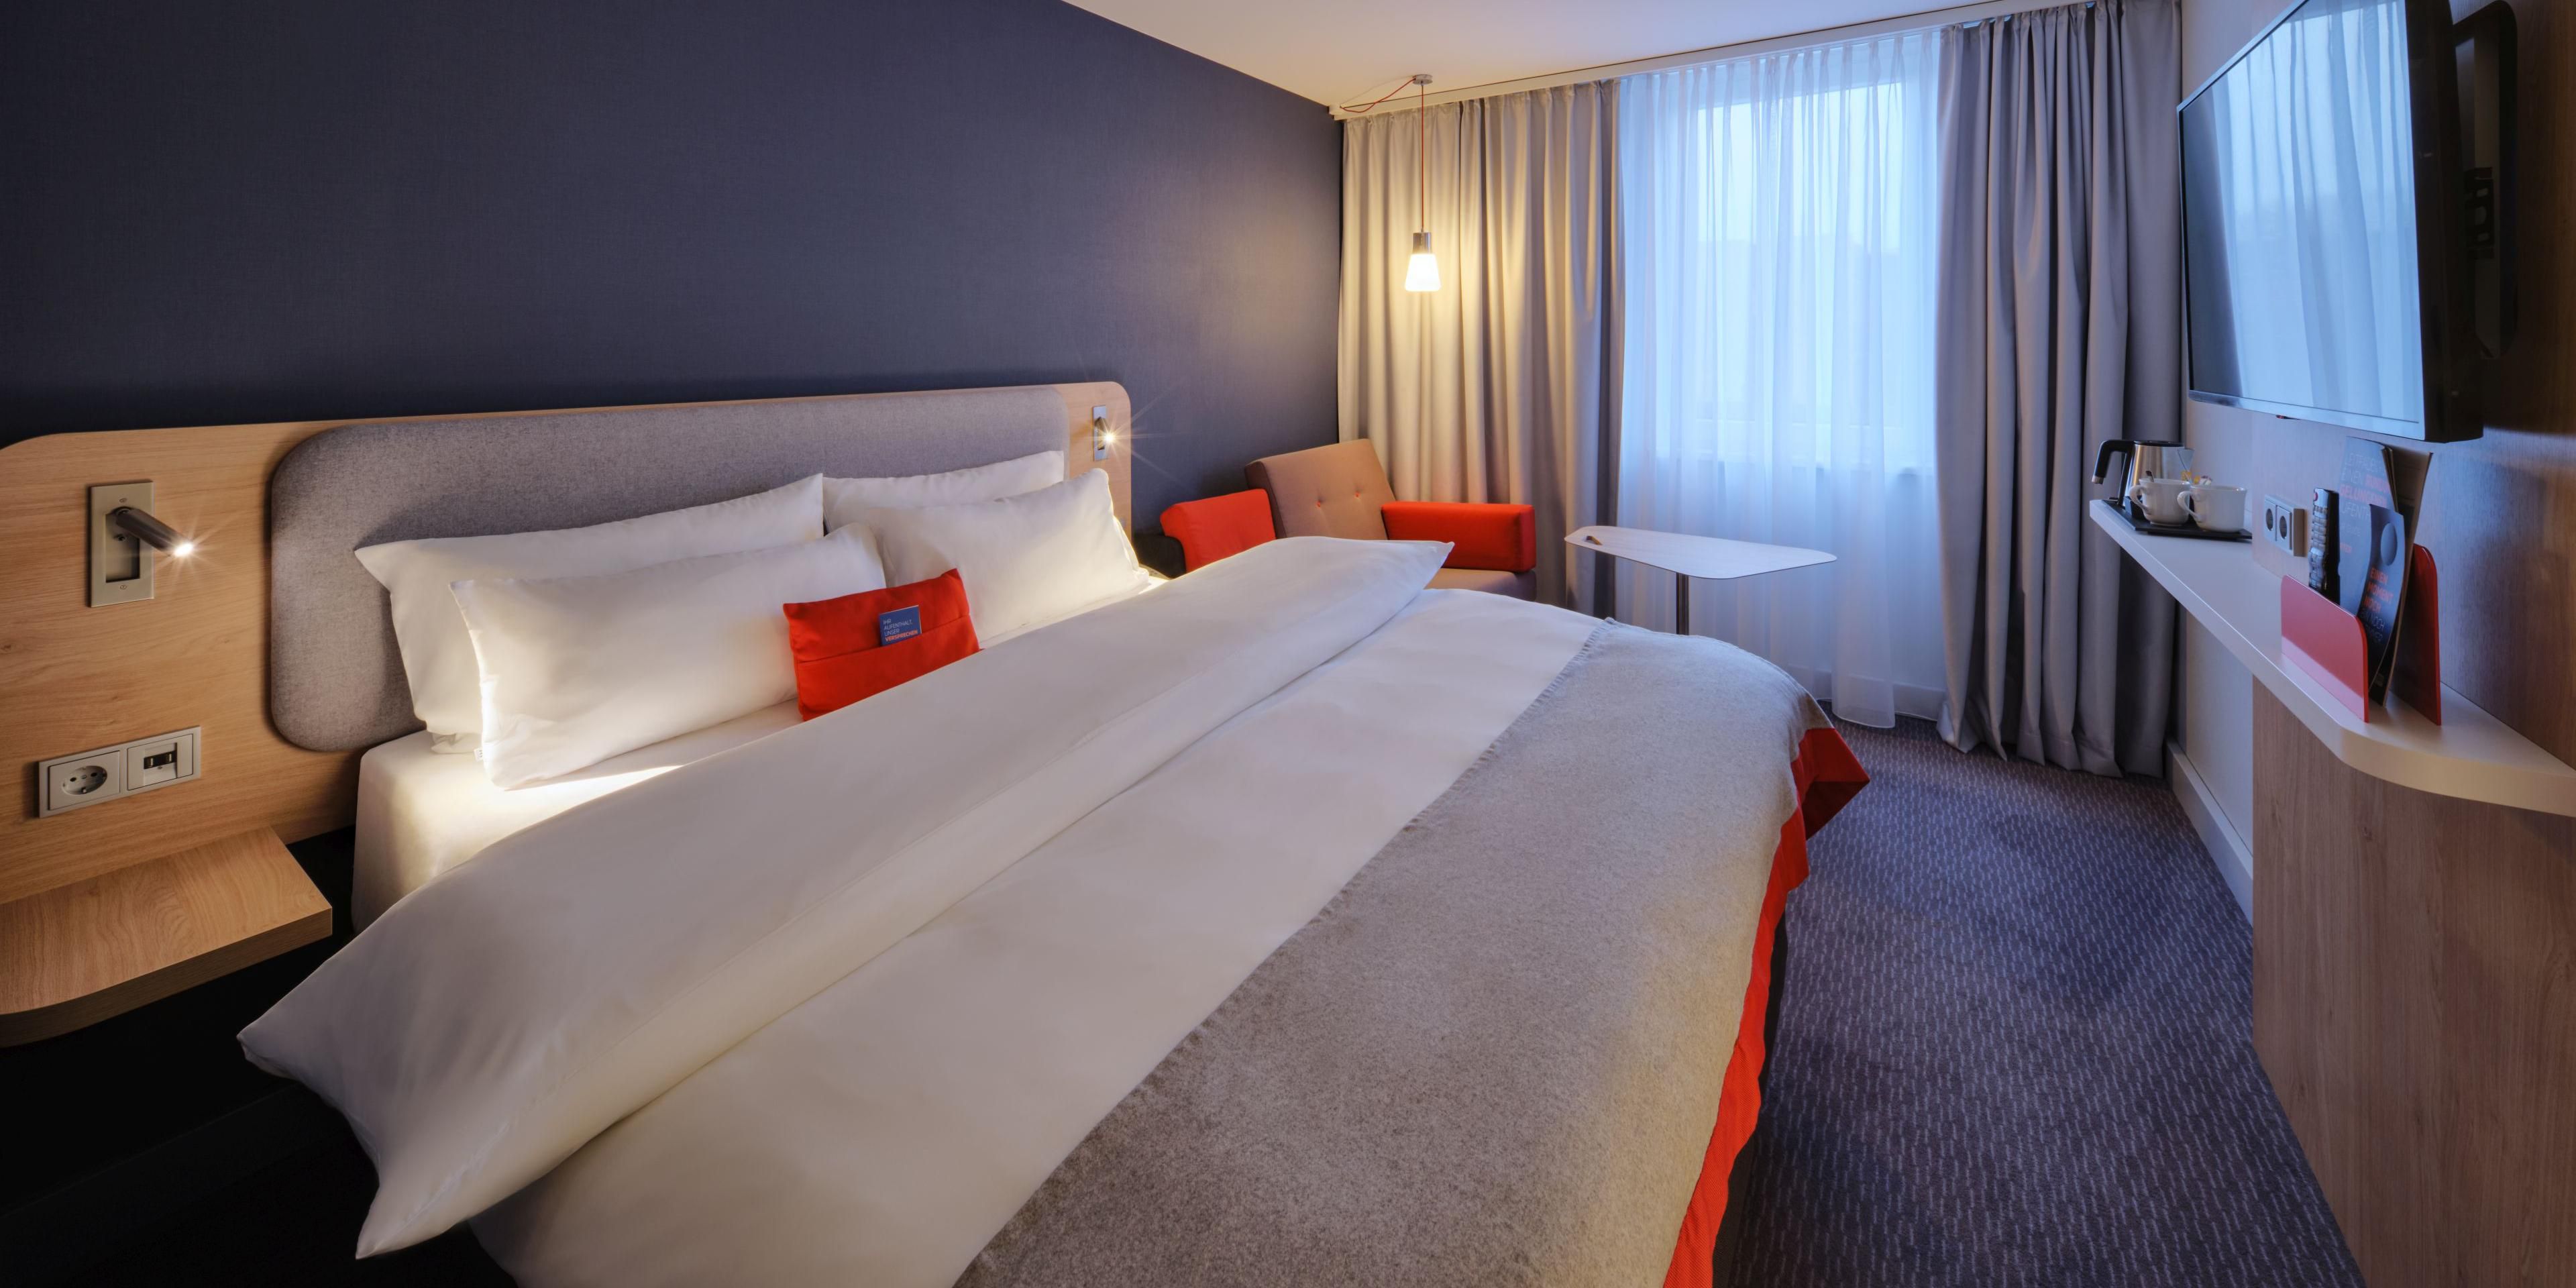 Drift off to sleep in our restful Next Generation guest rooms with blackout curtains and comfortable beds. They´re decorated in calm shades enlivened by pops of colour and all have Flatscreen TVs, bedside USB ports and inclusive WiFi. If you´re travelling with kids, all our family rooms have sofa beds.